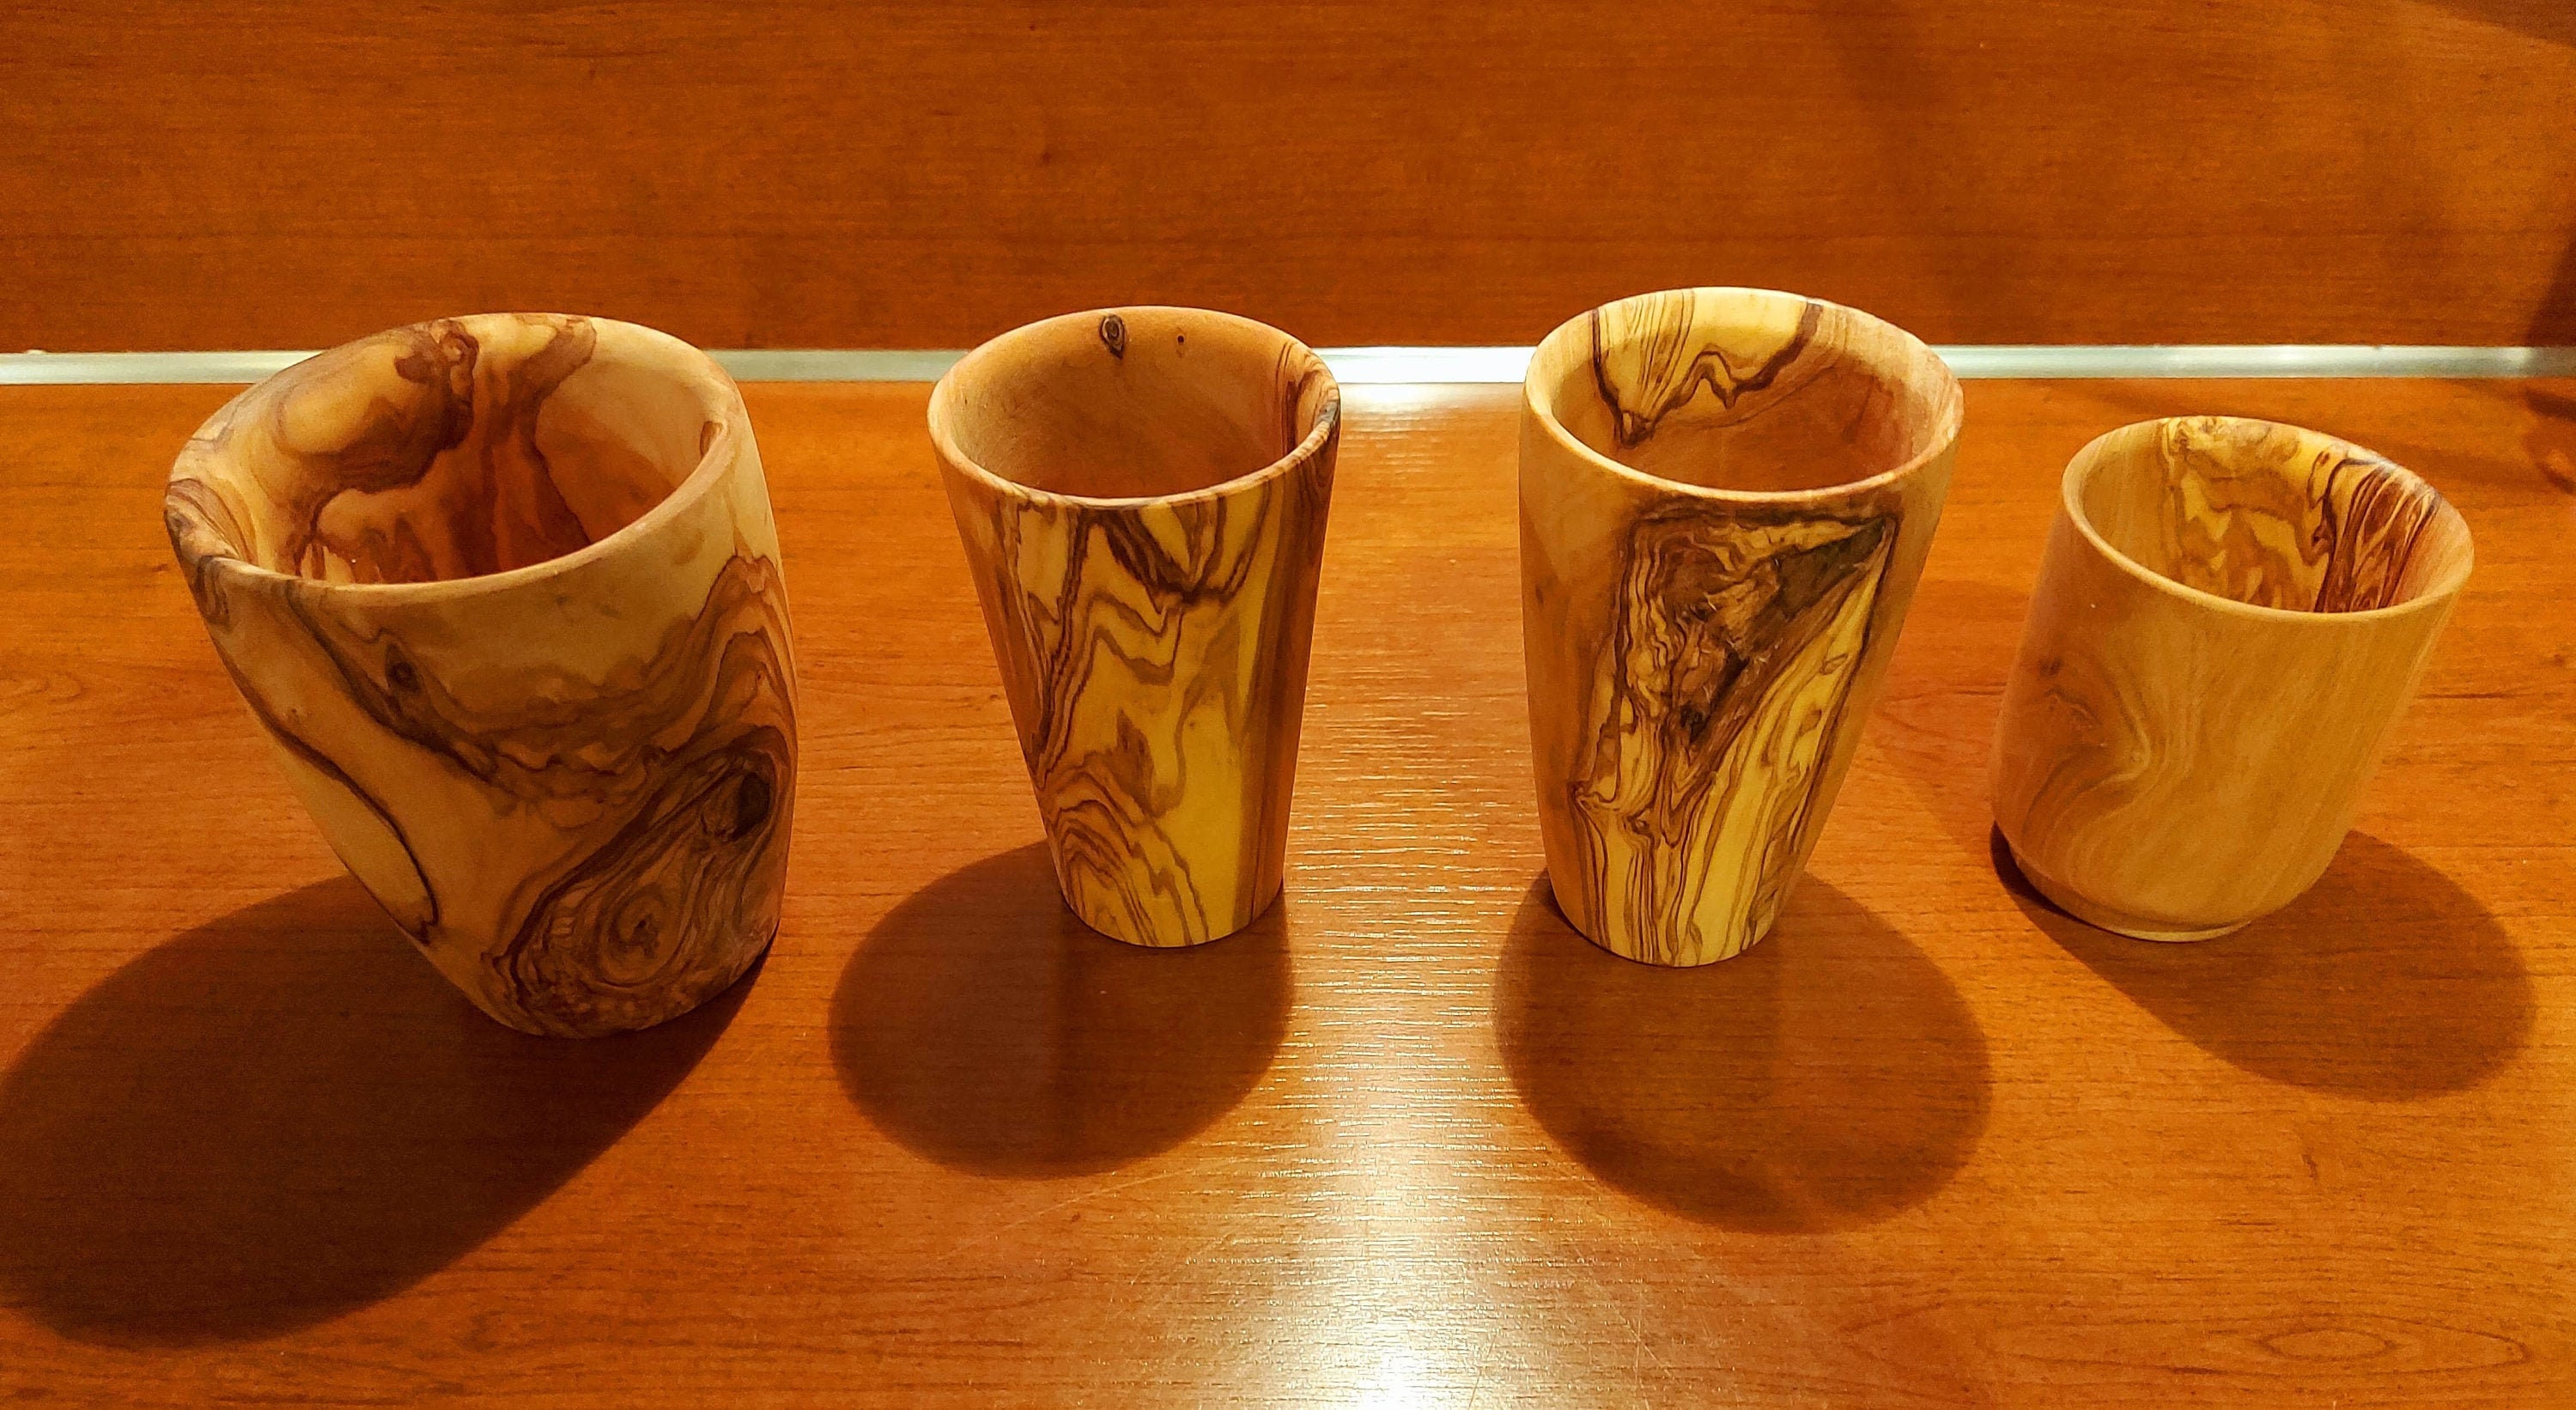 Plastic Cups - Olive Wood Brewing & Craft Co